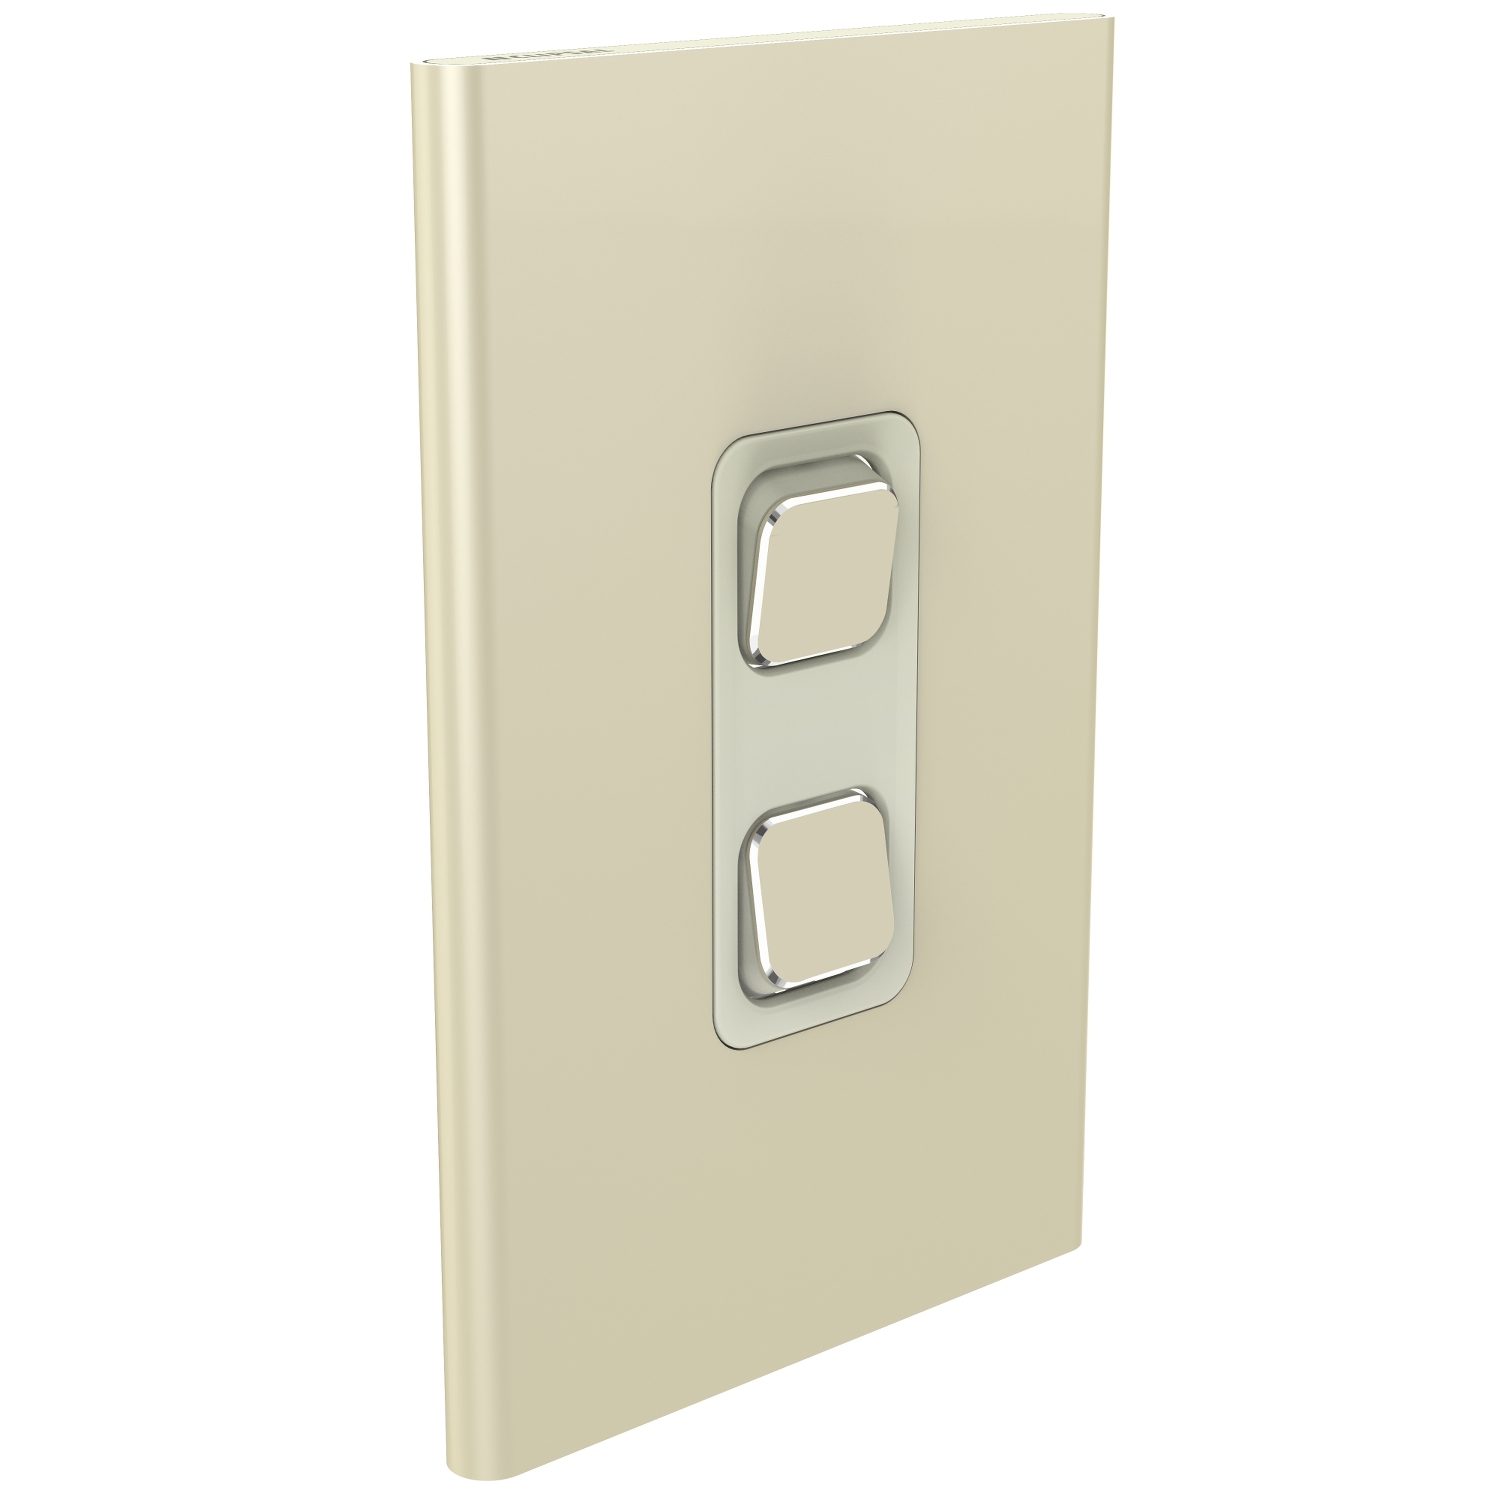 PDL Iconic Styl, cover frame, 2 switches, vertical - Crowne